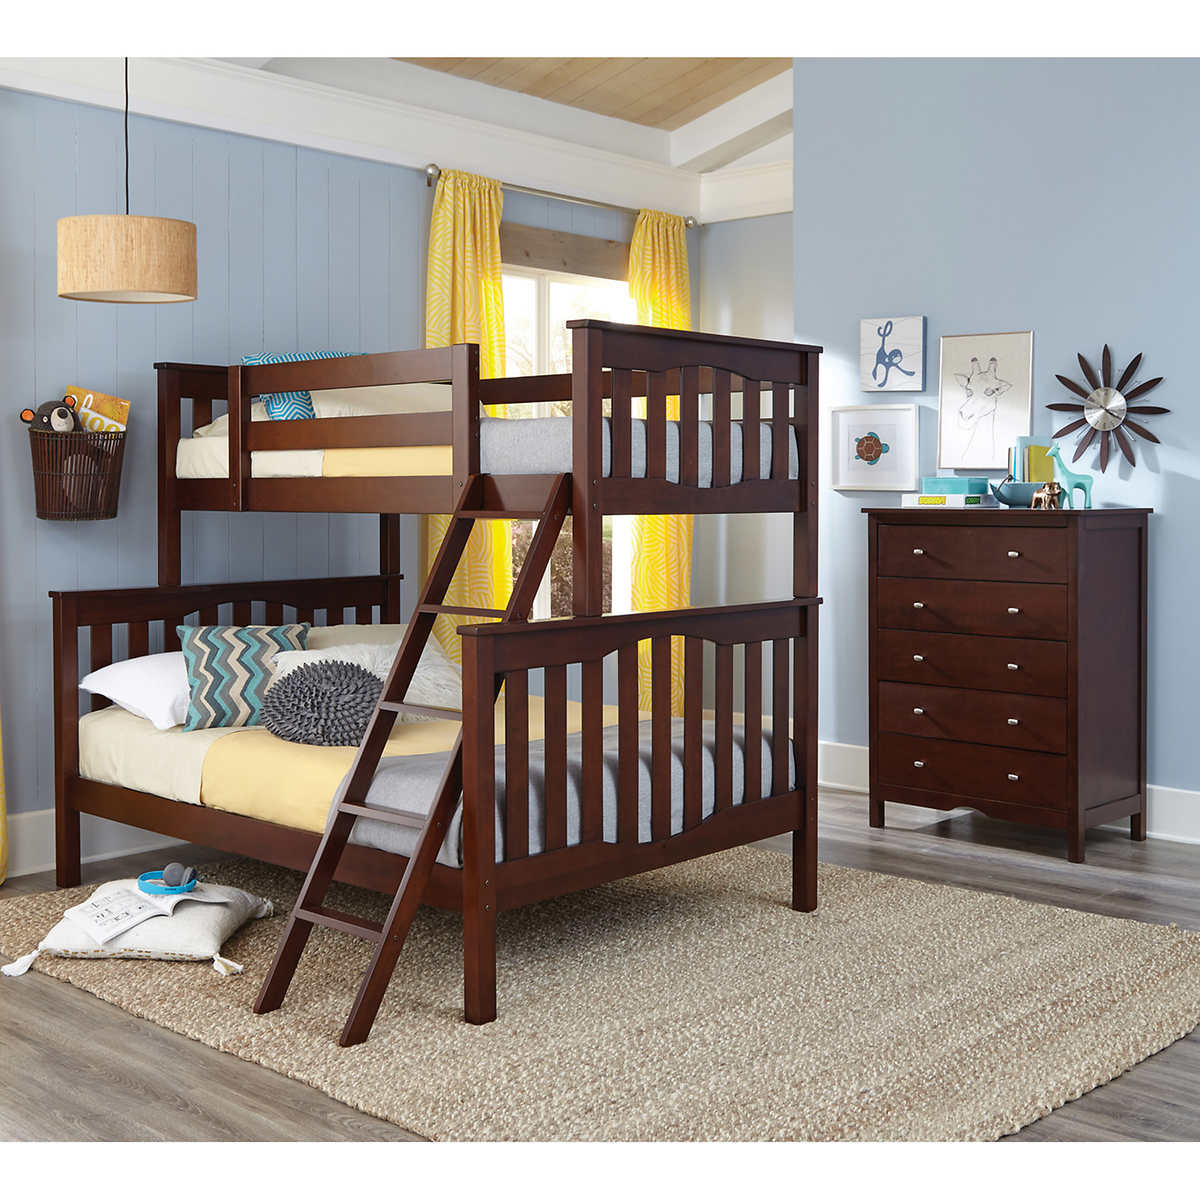 Seneca 2 Piece Twin Over Full Bunkbed, Visions Twin Over Full Bunk Bed